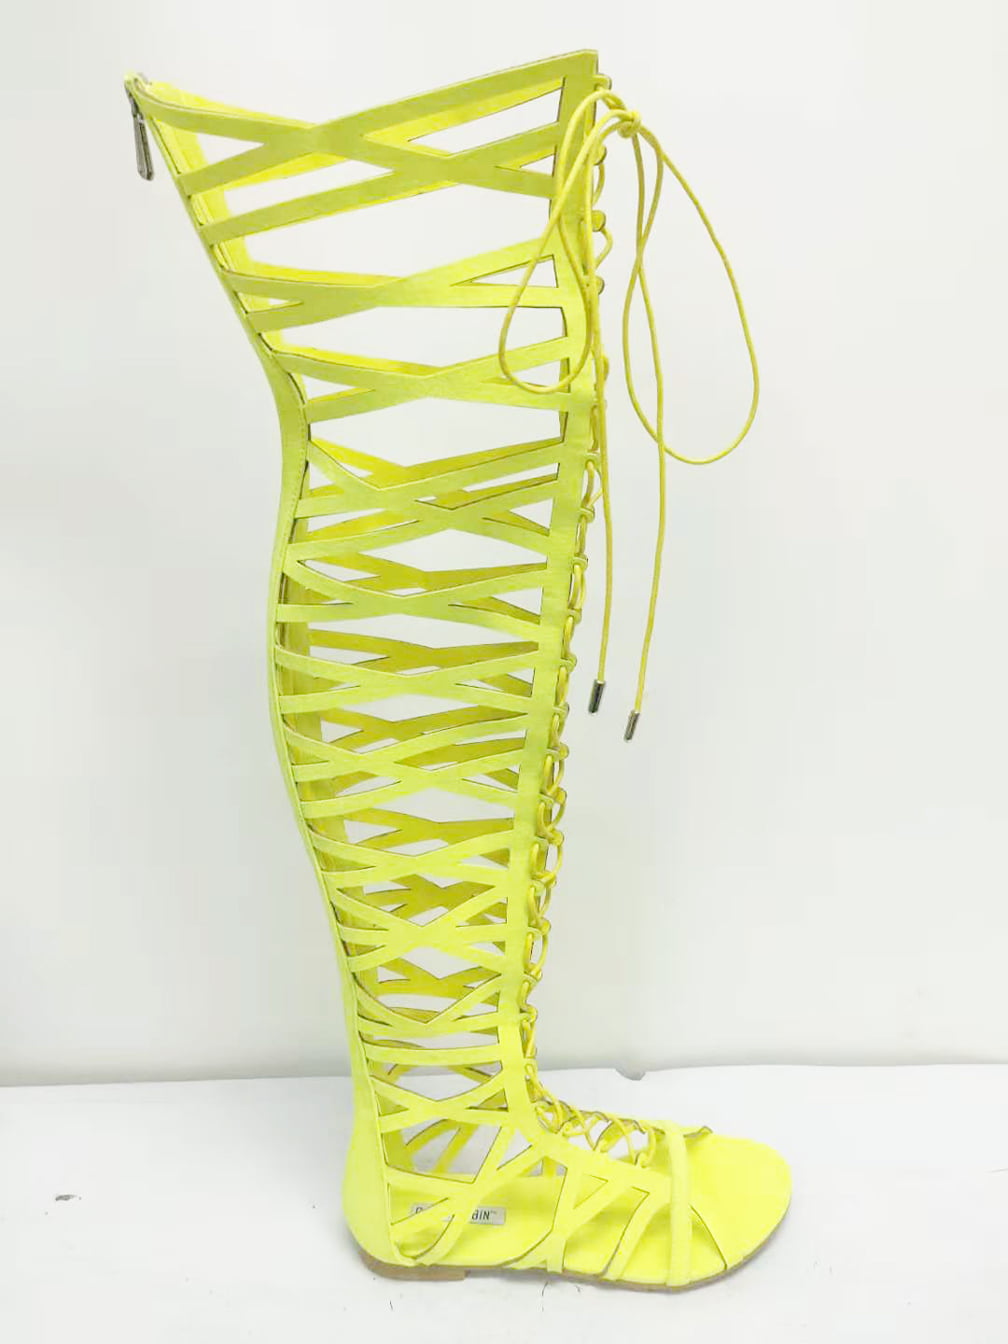 yellow lace up flat sandals